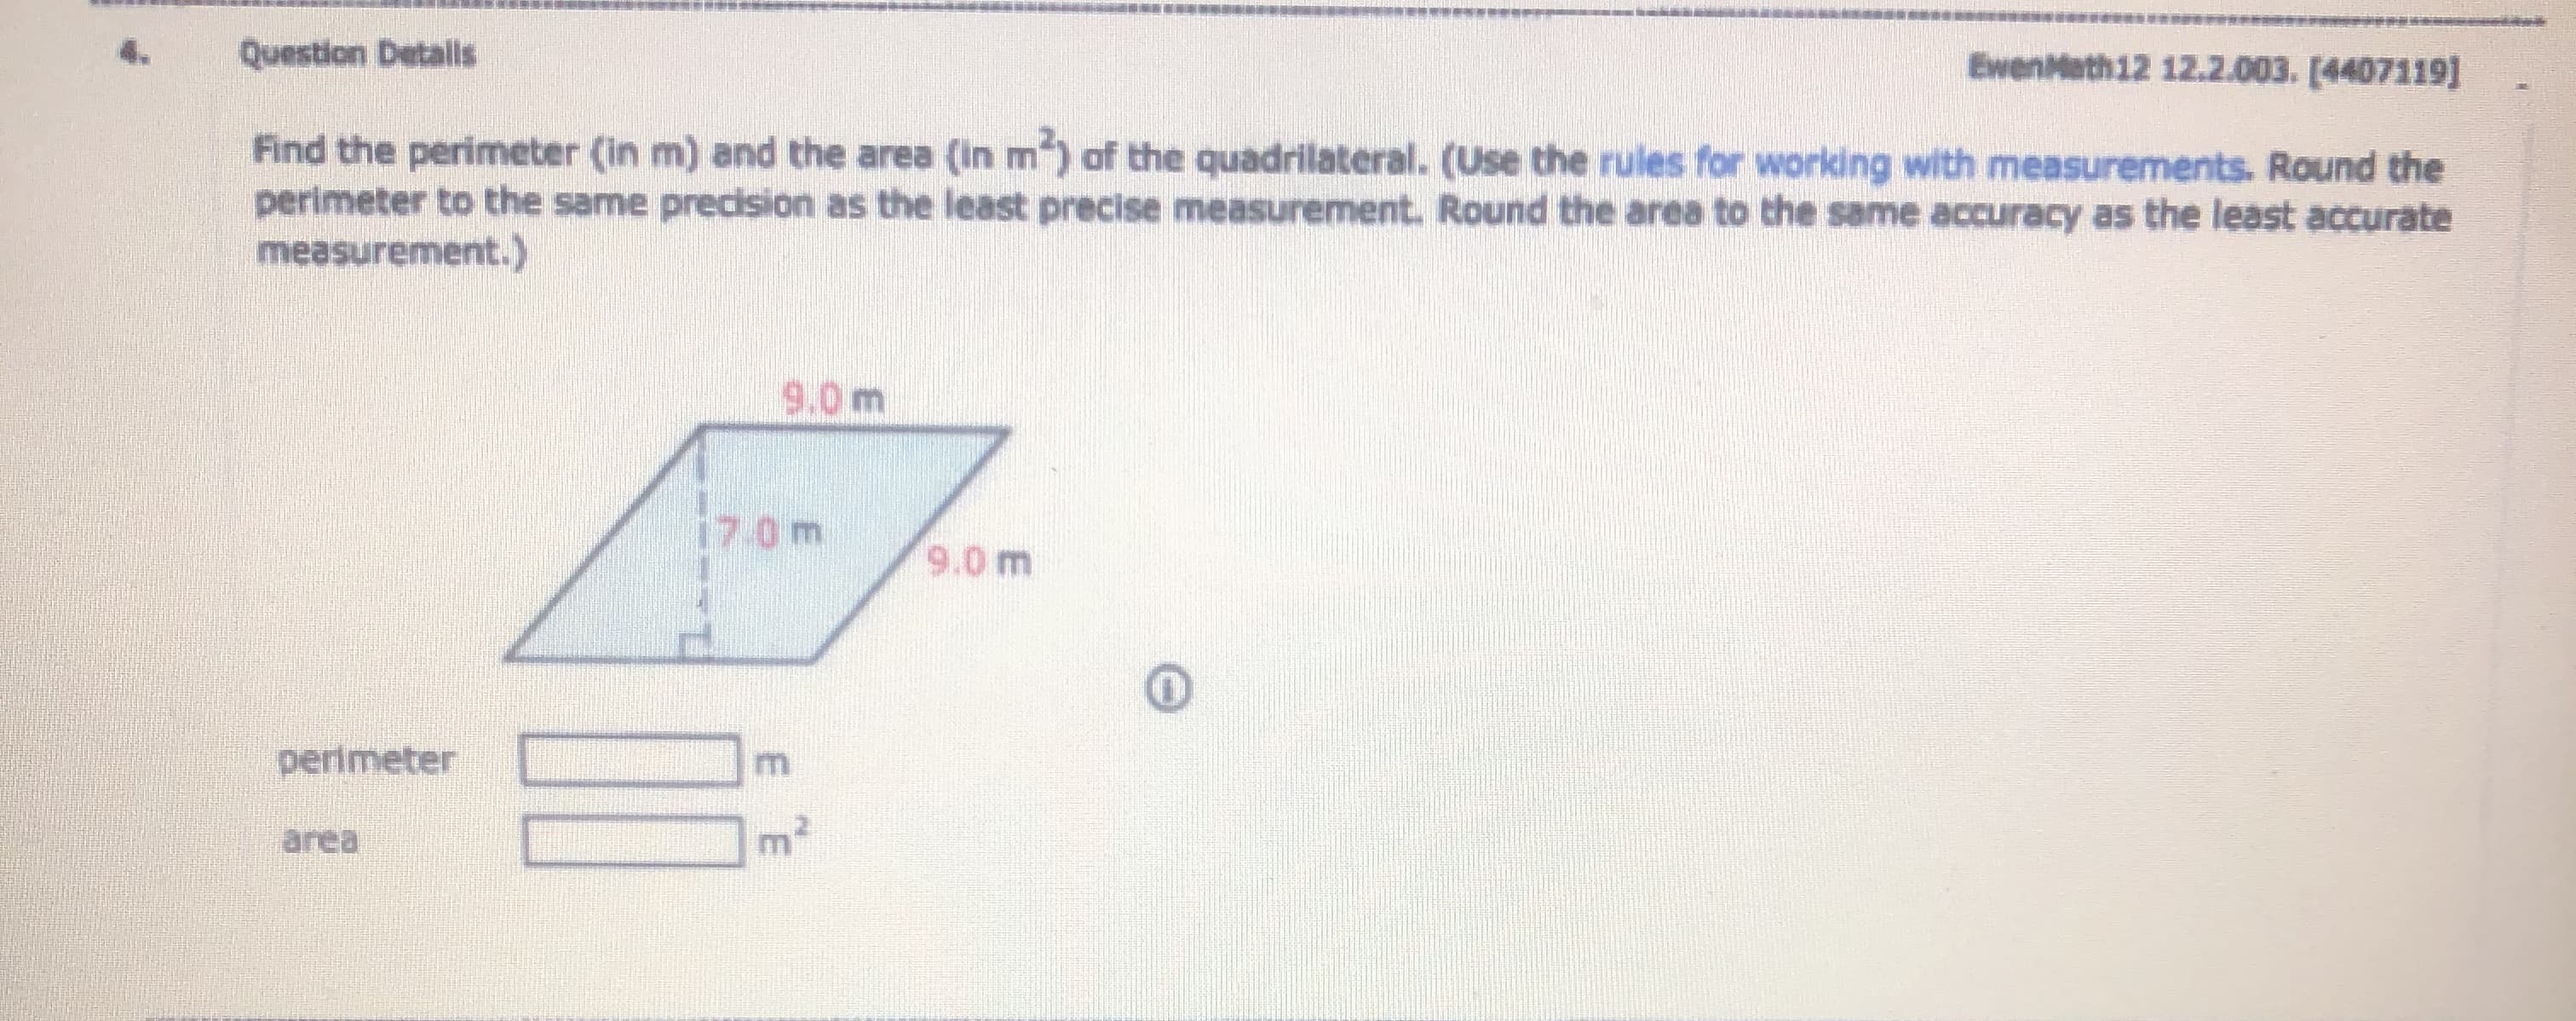 Question Detalls
EwenMath12 12.2.003. [4407119]
Find the perimeter (in m) and the area (in m") of the quadrilateral. (Use the rules for working with measurements. Round the
perimeter to the same precision as the least precise measurement. Round the area to the same accuracy as the least accurate
measurement.)
9.0m
17.0m
9.0 m
perimeter
area
E E
